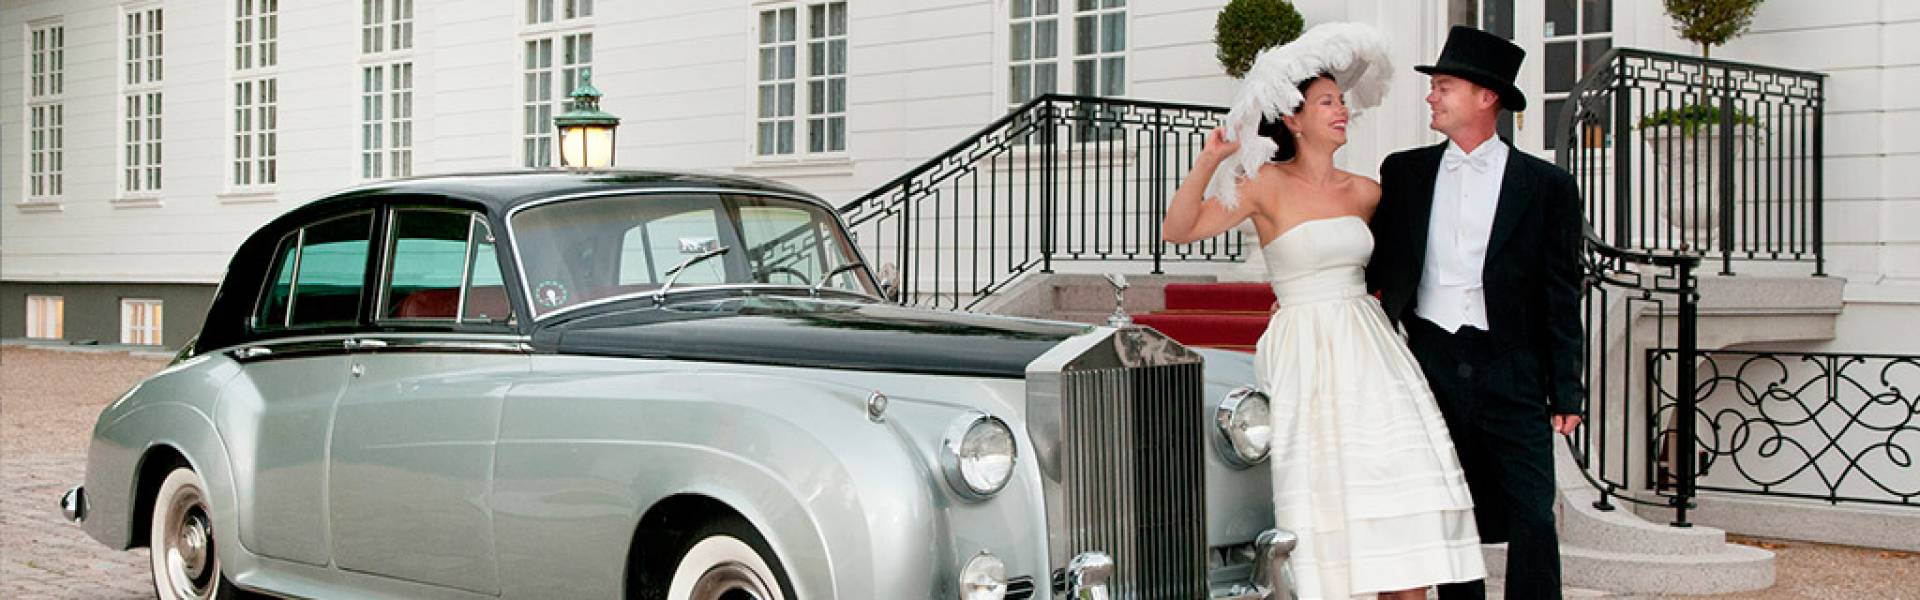 Adelaide Classic Wedding Car Hire 5 Star Service Instant Quote